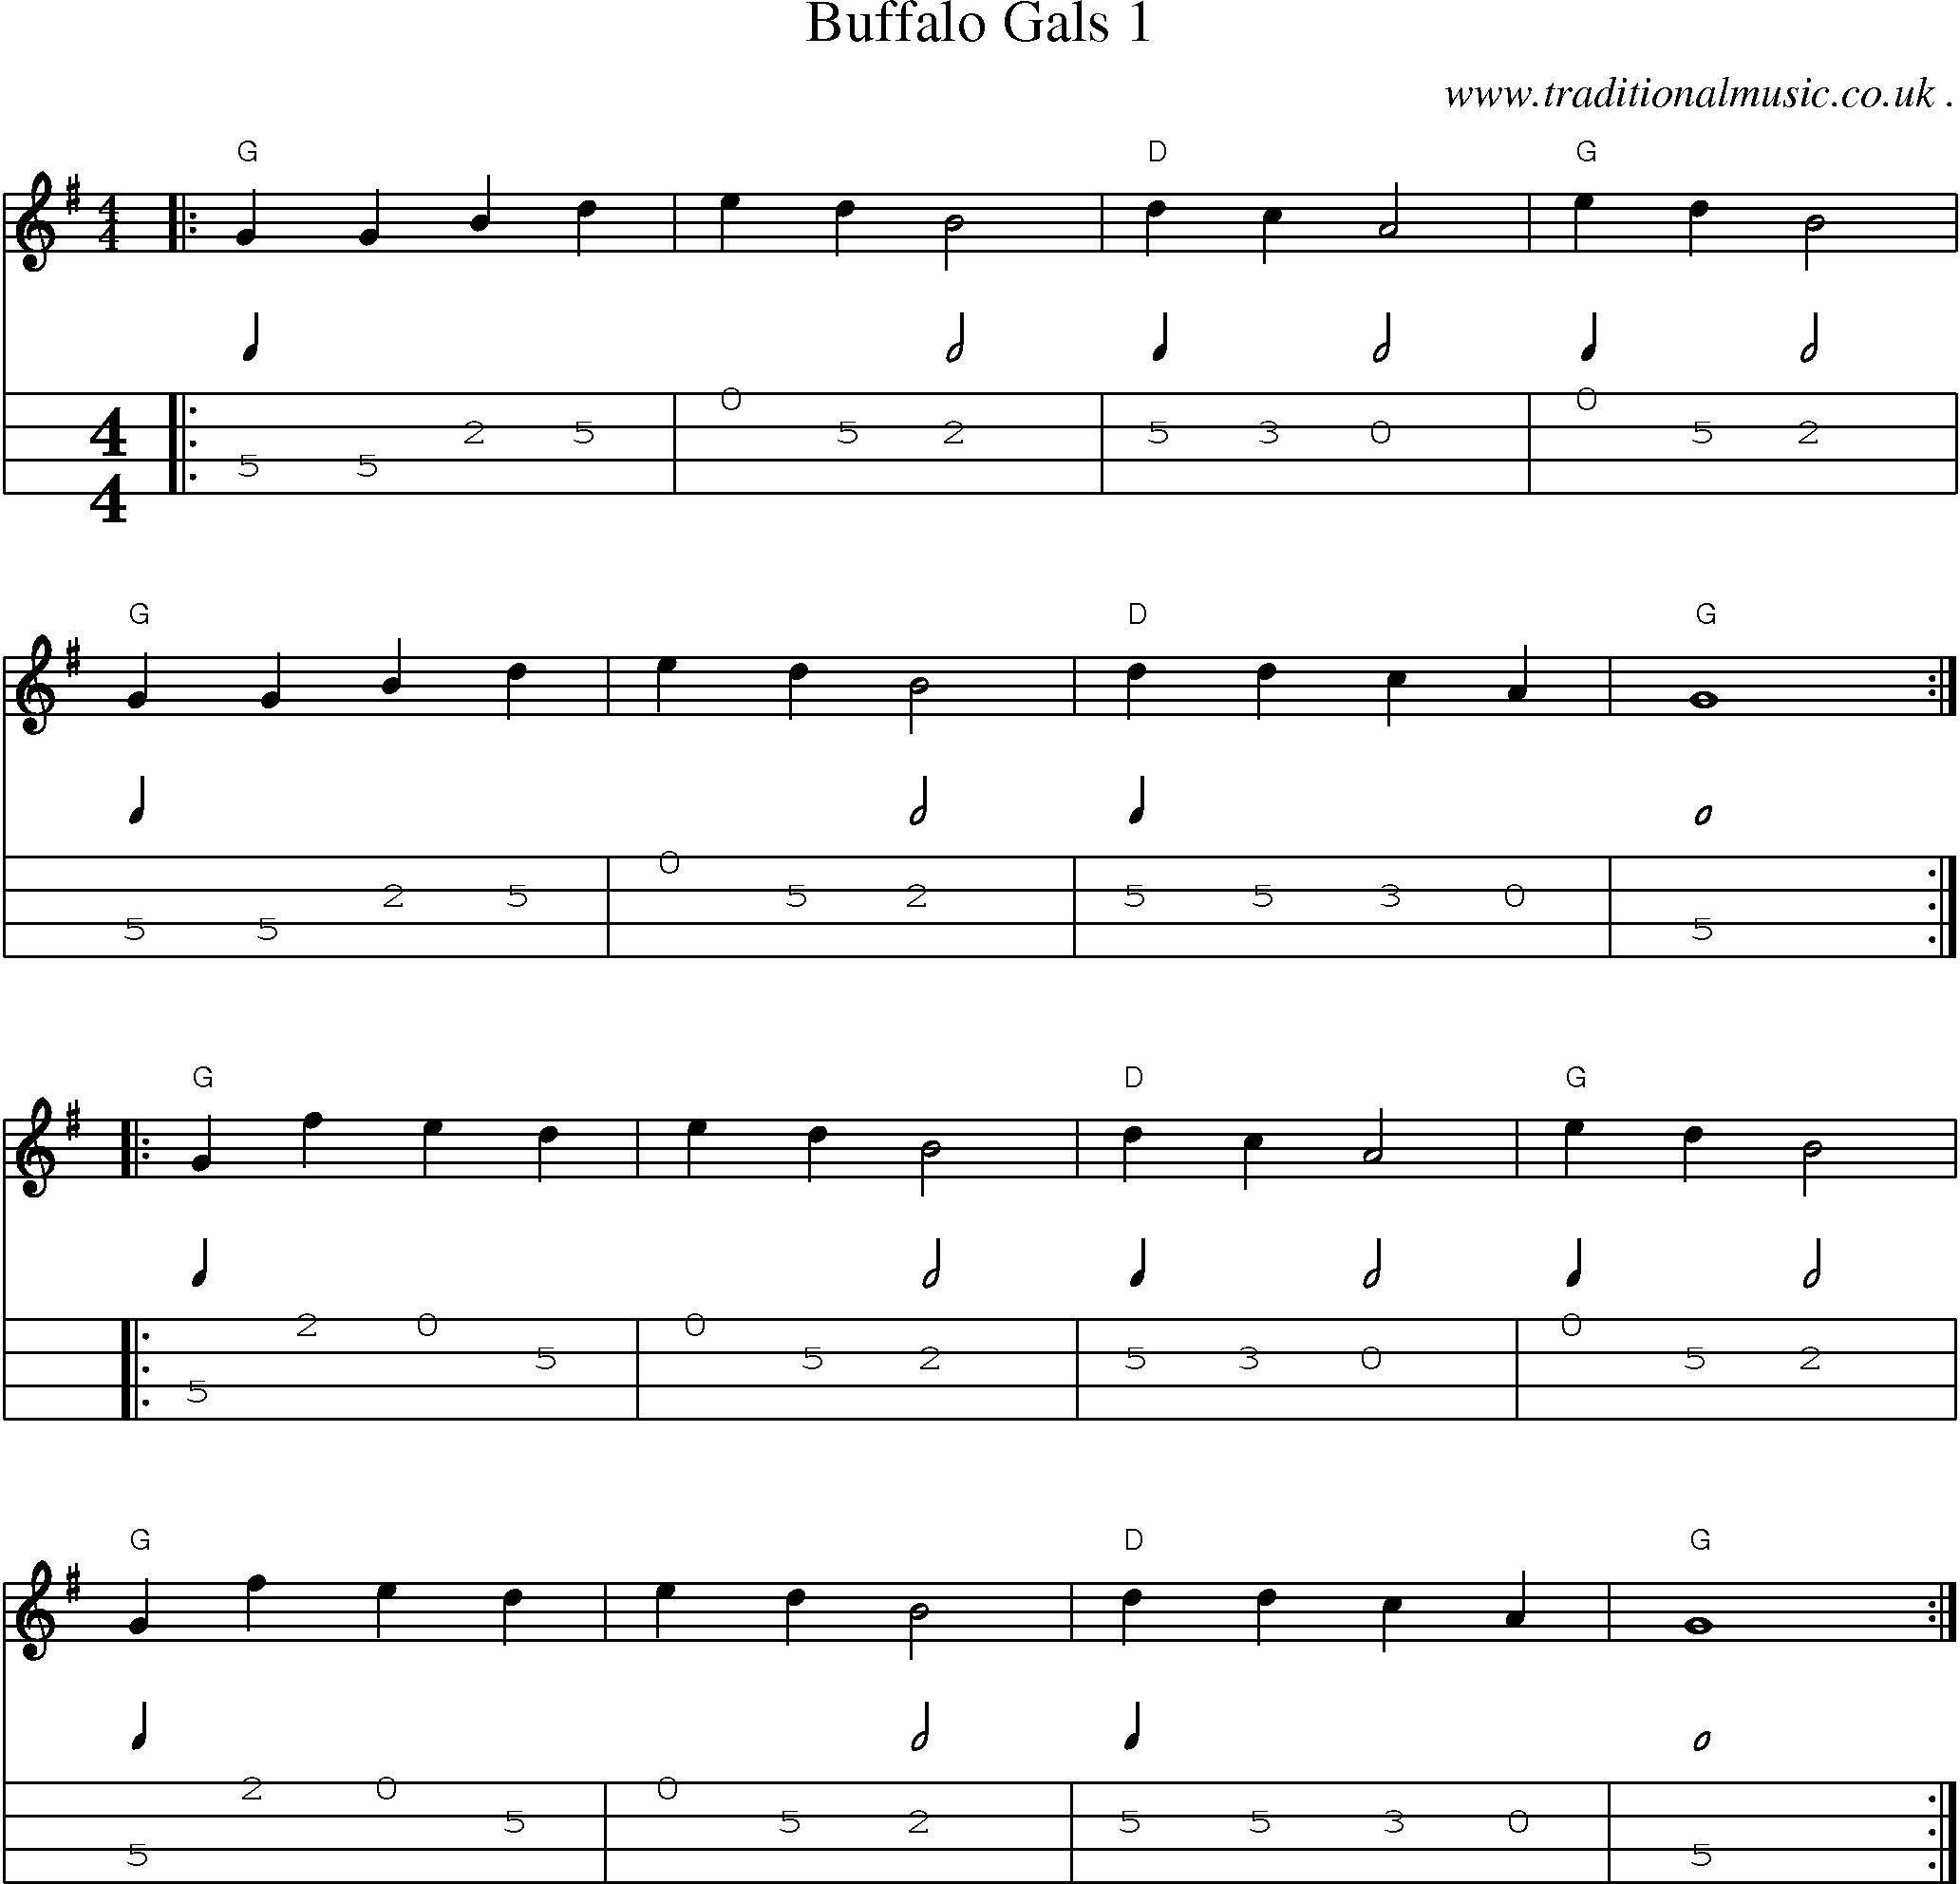 Music Score and Mandolin Tabs for Buffalo Gals 1